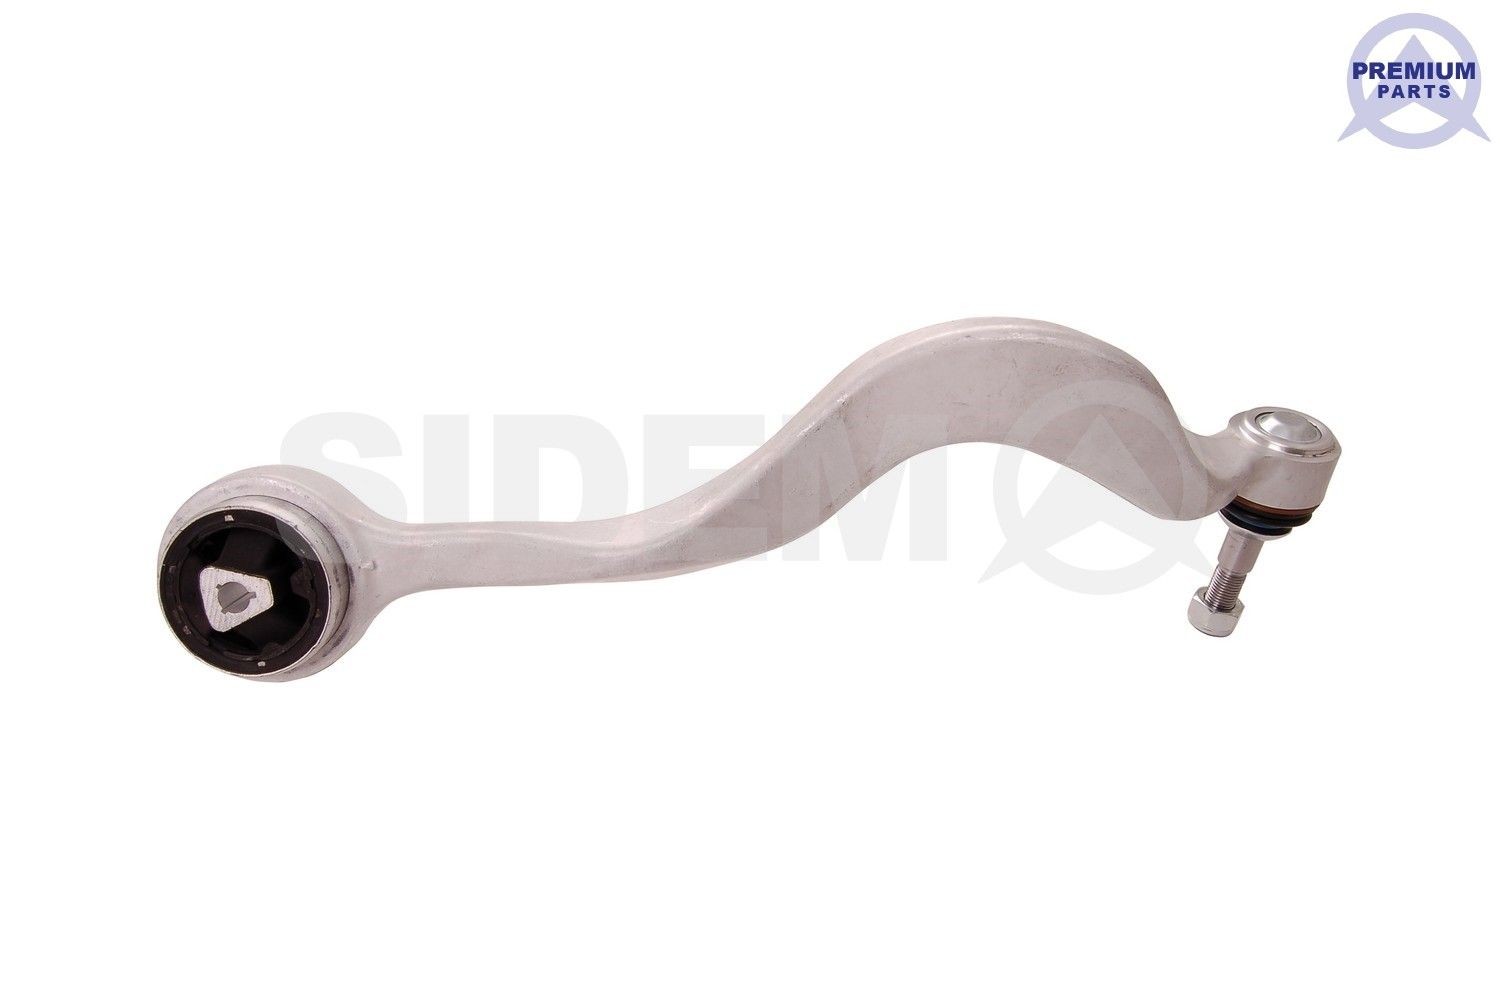 SIDEM 21475 Suspension arm Lower, Front, Front Axle Right, Trailing Arm, Aluminium, Cone Size: 16 mm, Push Rod